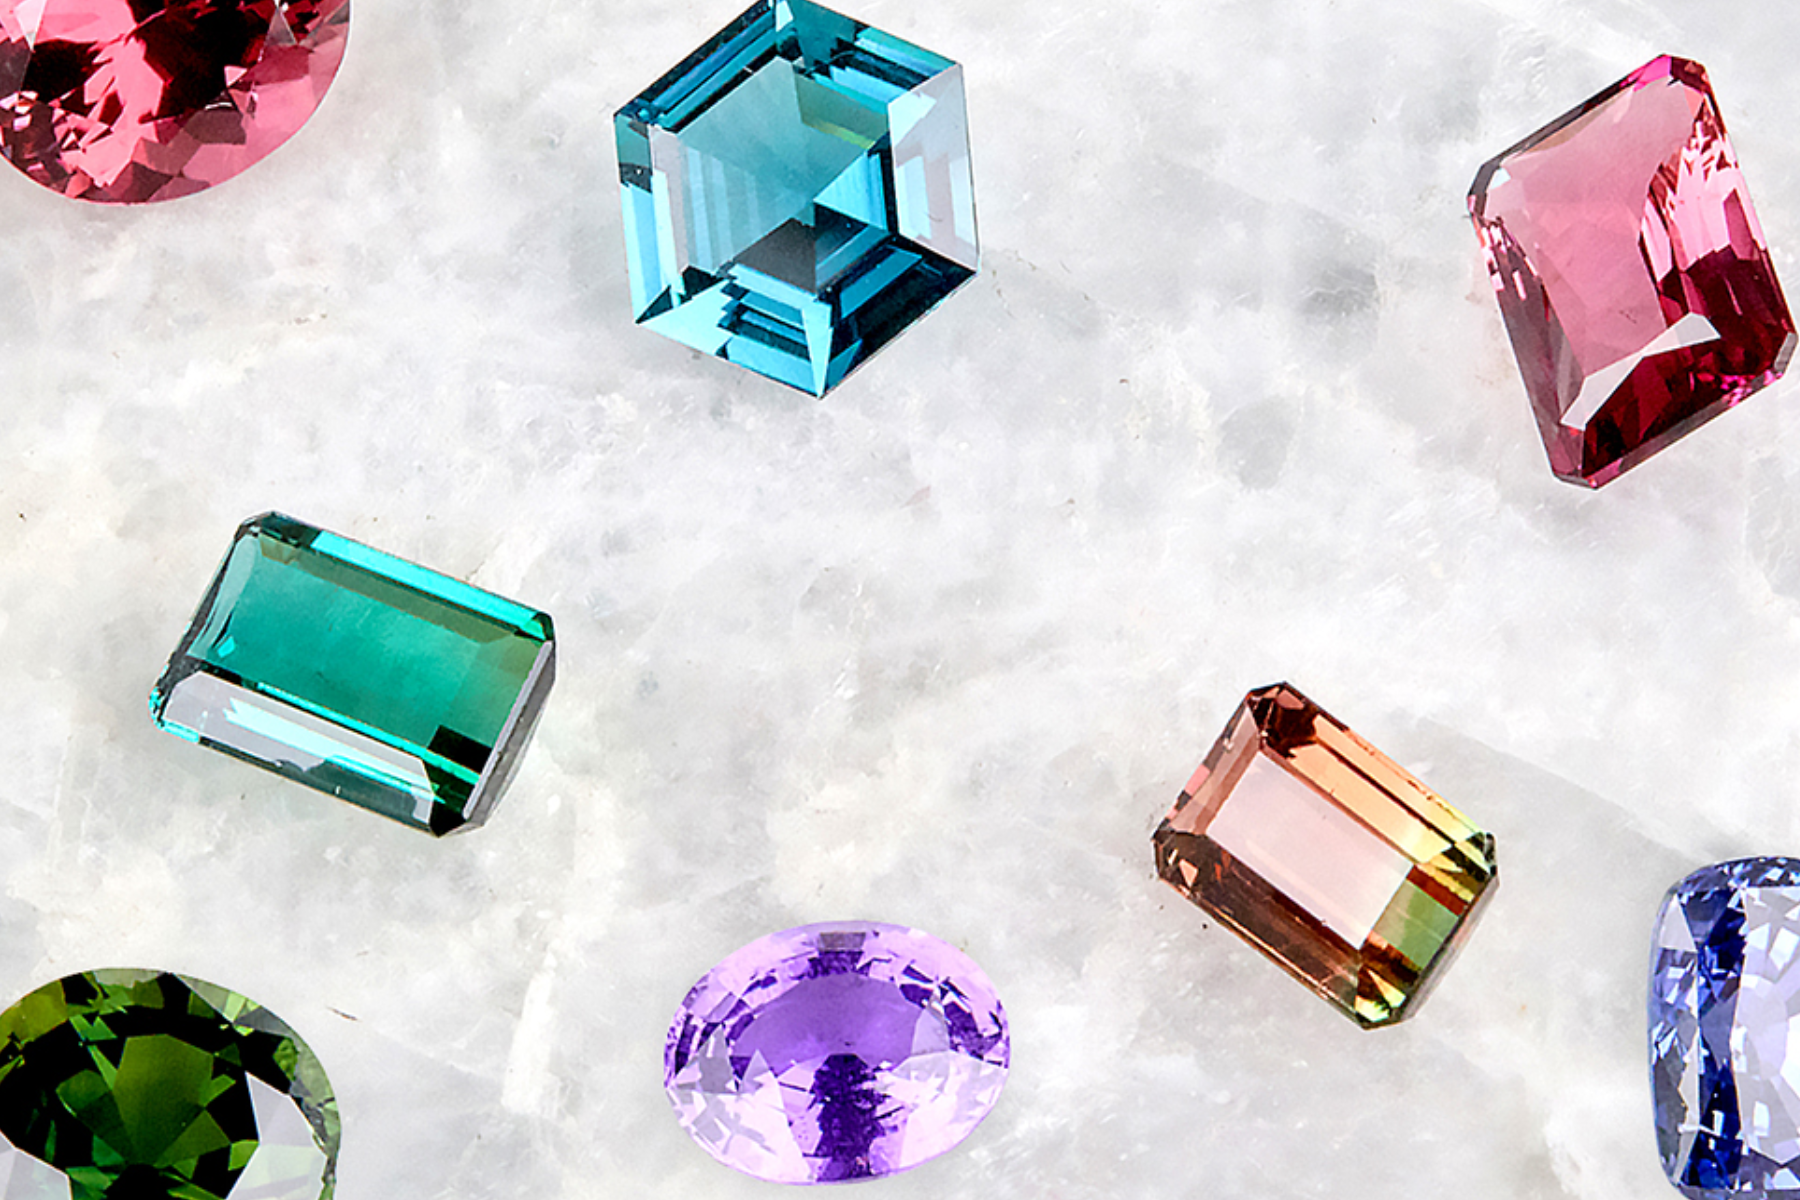 The image depicts eight colored gemstones placed on a white-gray background